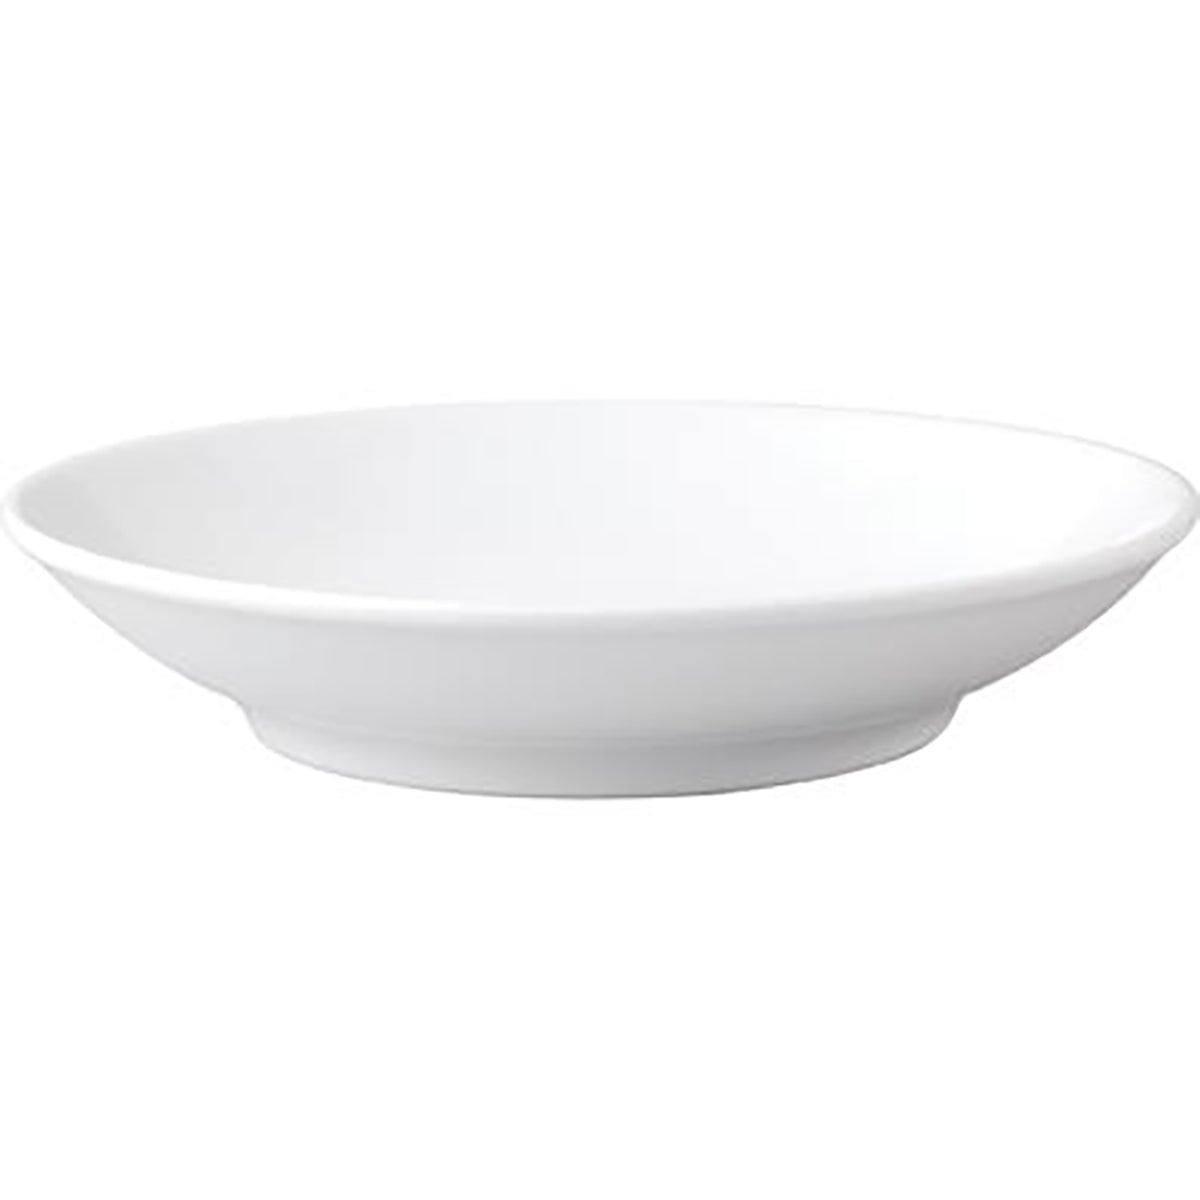 94387 Royal Porcelain Chelsea Round Plate Coupe 260mm (P5509) Tomkin Australia Hospitality Supplies